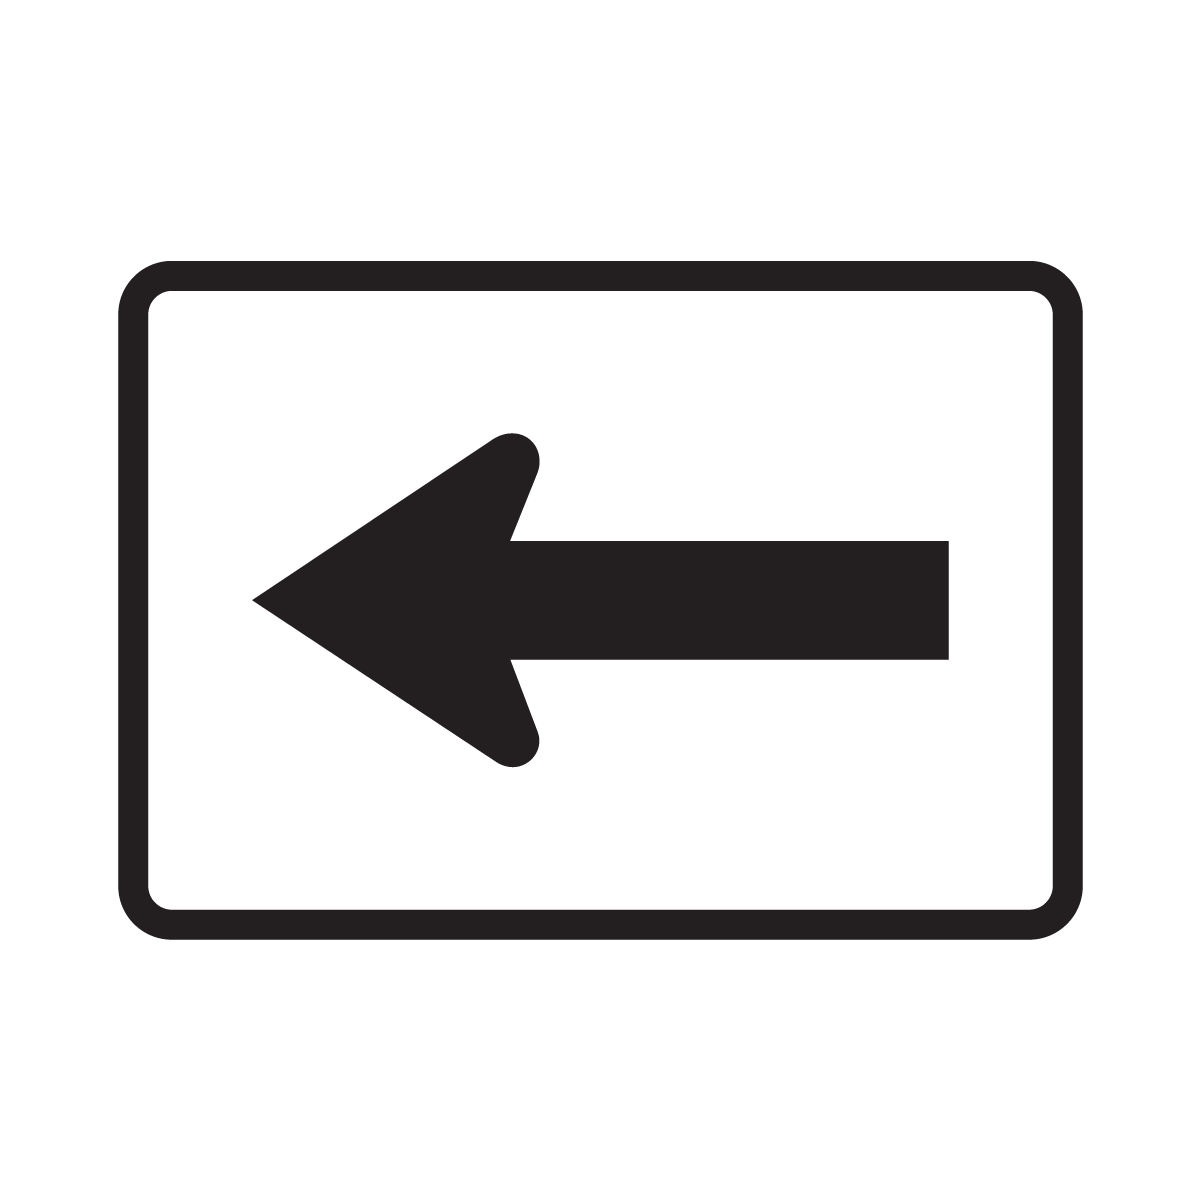 M6-1 Turn Arrow (Left or Right)